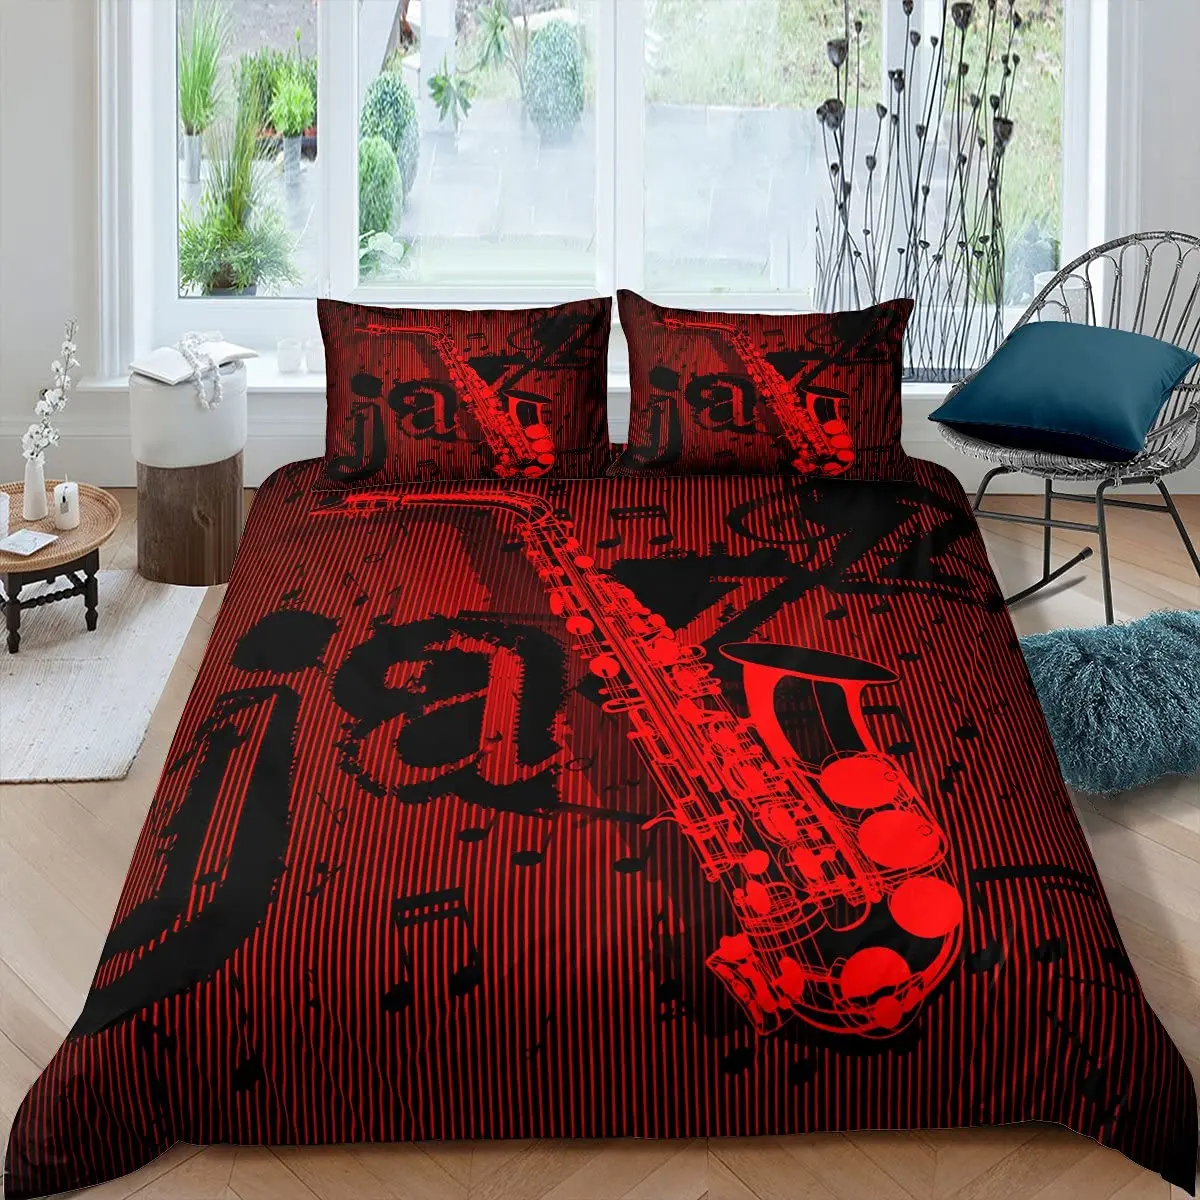 

Bedding Set Musical Instrument Retro Jazz Music Theme Twin Quilt Cover for Kids Saxophone Duvet Cover Set Rotating Musical Notes